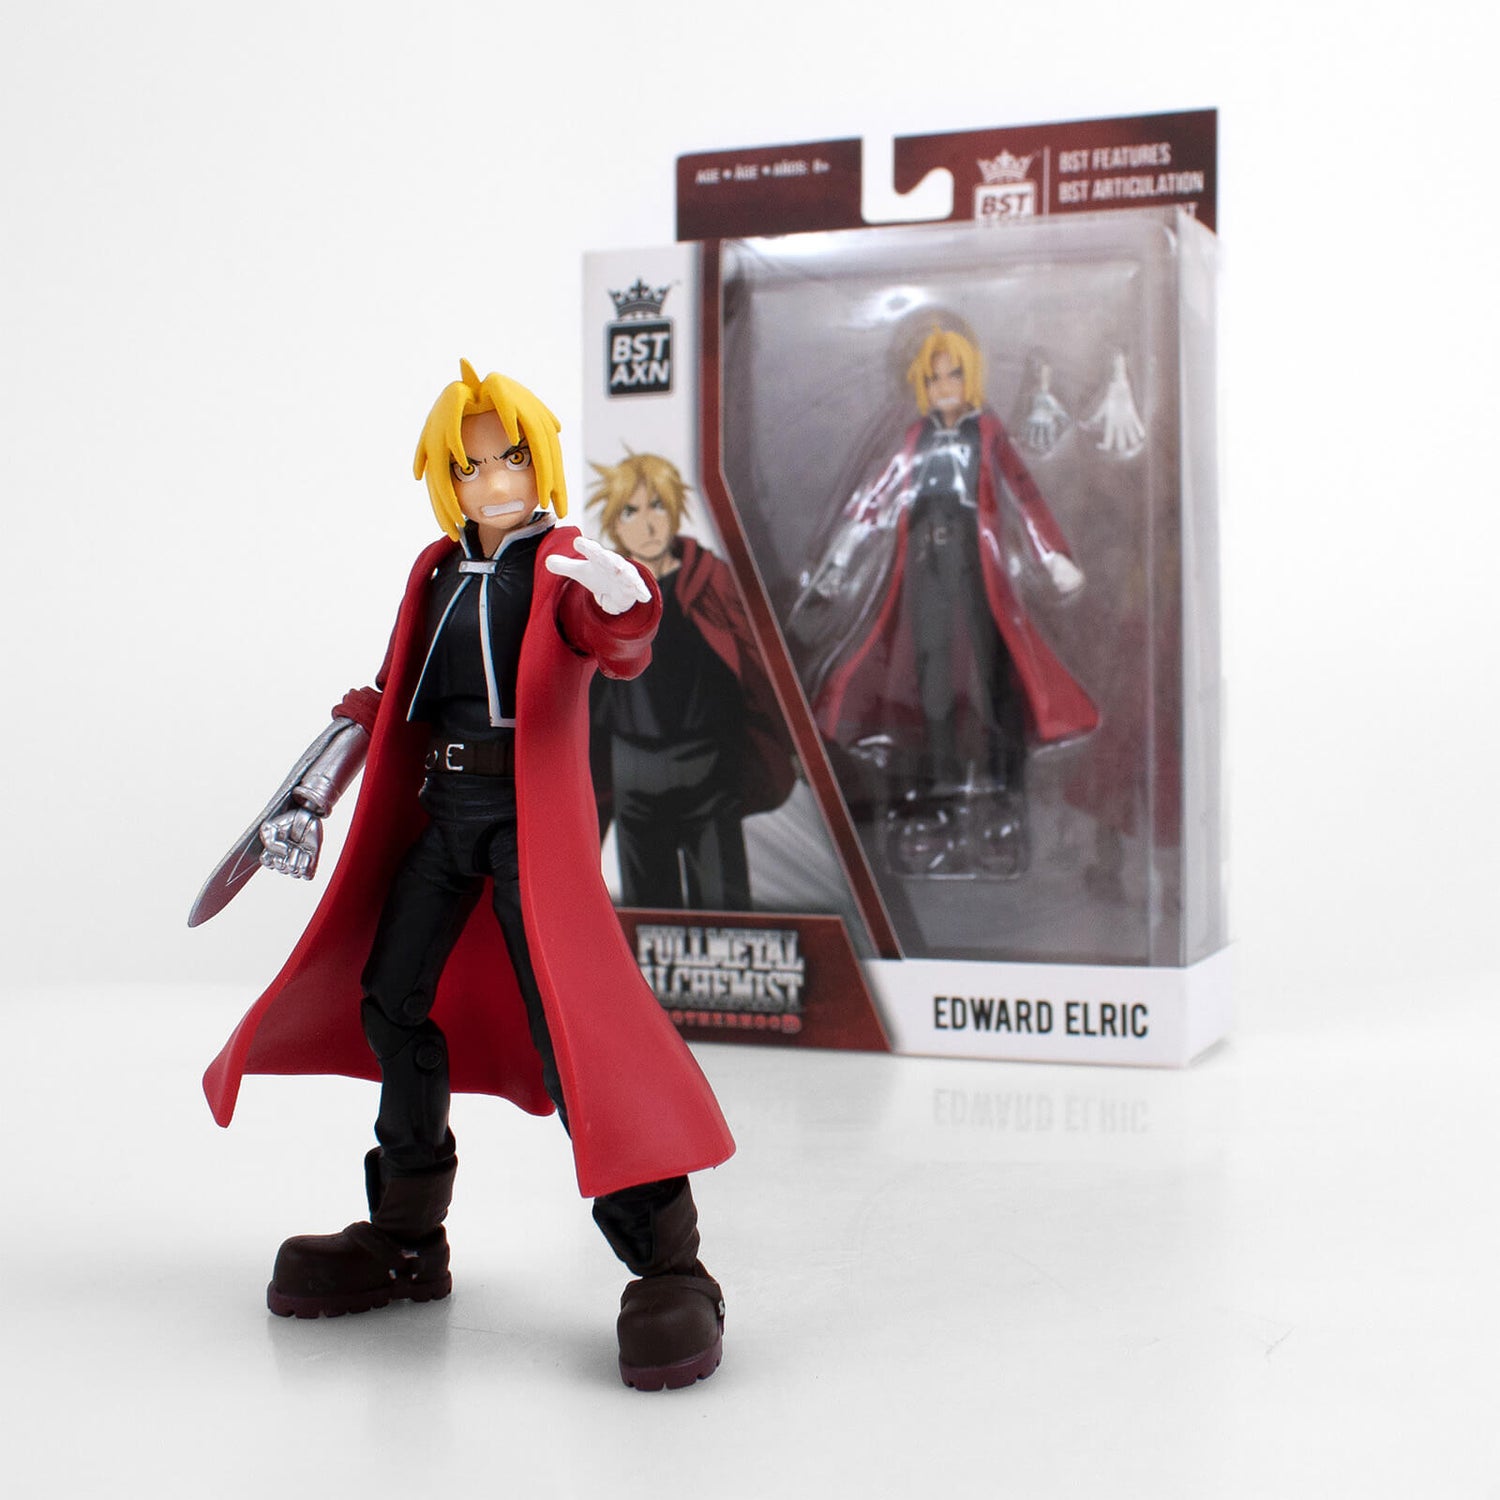 The Loyal Subjects BST AXN Fullmetal Alchemist 5in Action Figure - Edward Elric